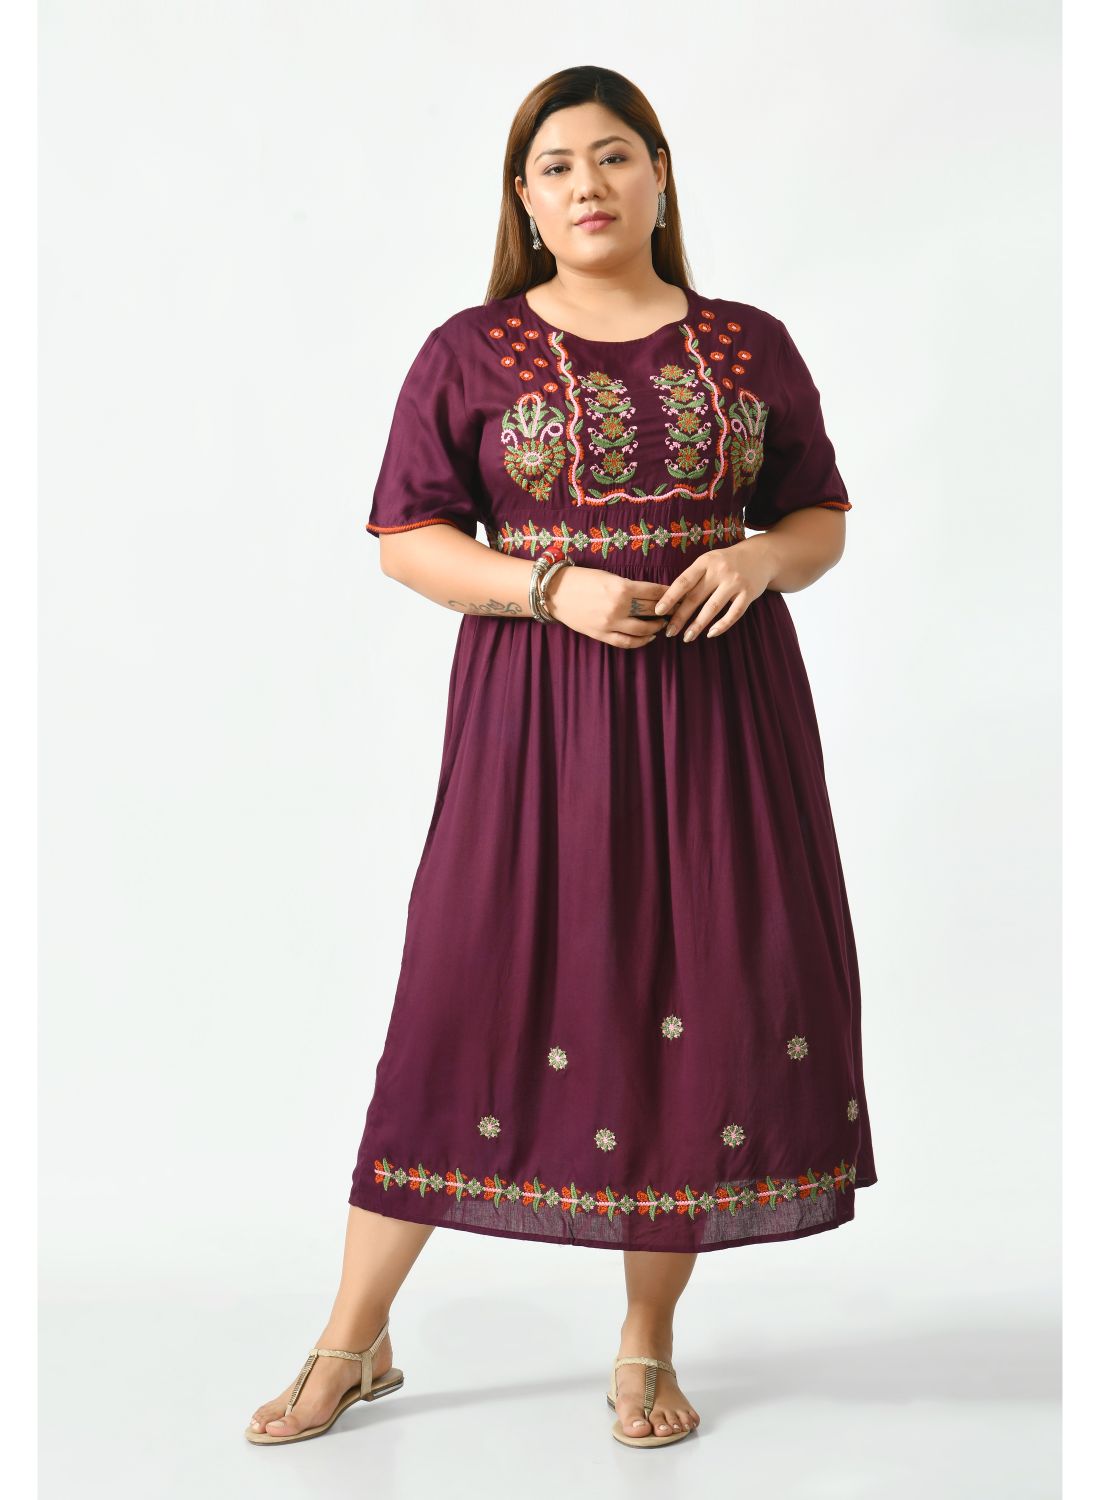 Brown Ethnic Motifs Embroidered A-Line Midi Dress Plus Size